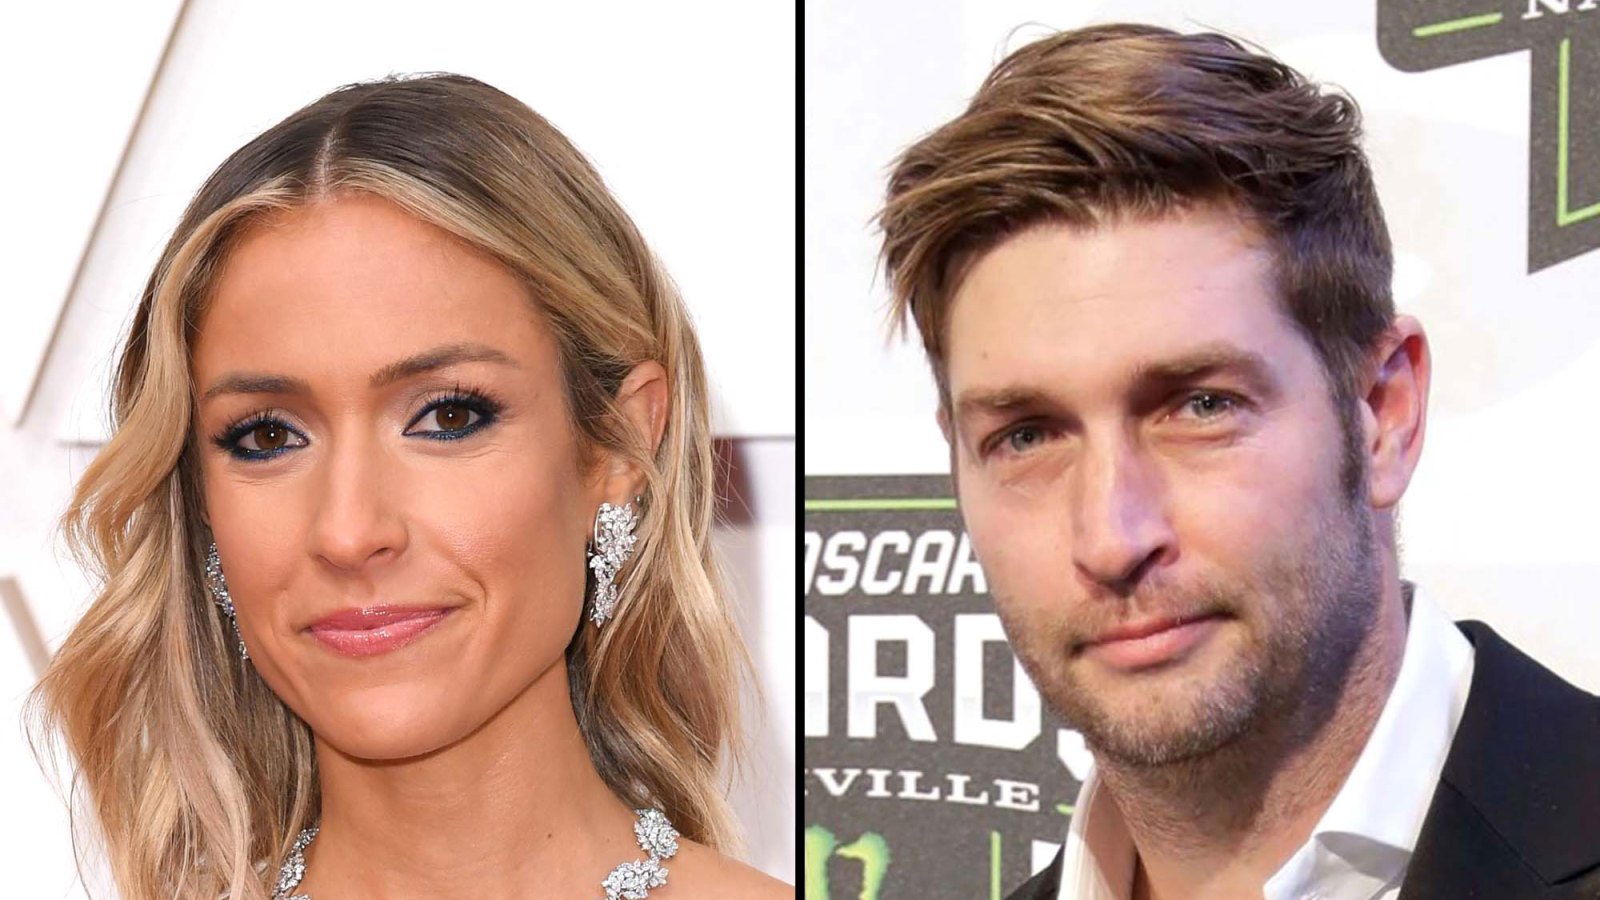 Kristin Cavallari Went on a ‘Couple Dates’ With Jay Cutler Post Split: 'Didn’t Want to be In a Toxic Relationship Anymore'